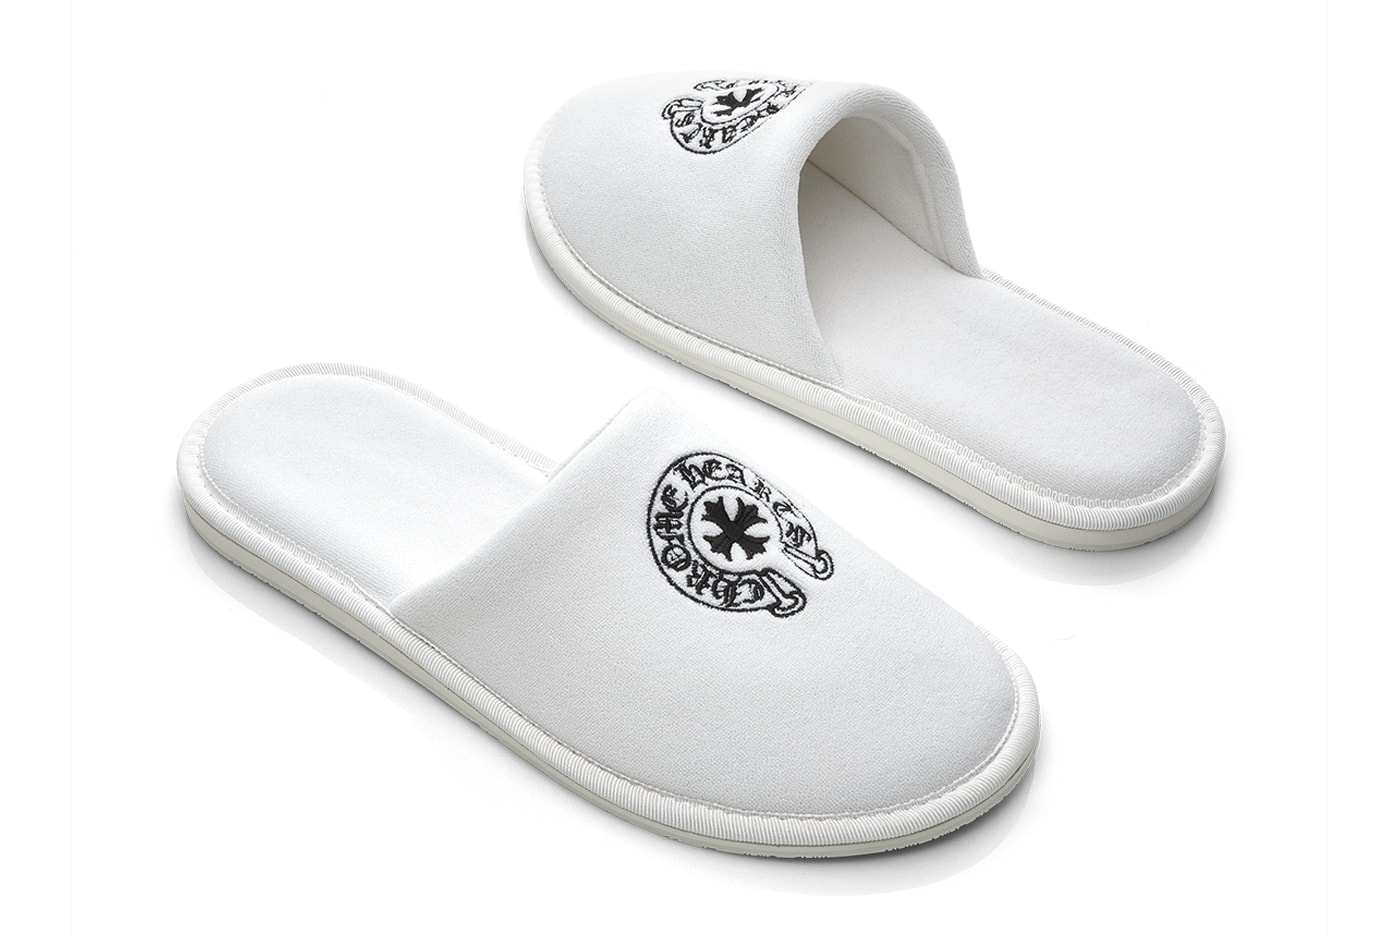 Chrome Hearts 475 USD Hotel Slippers Release Information details date footwear sandals